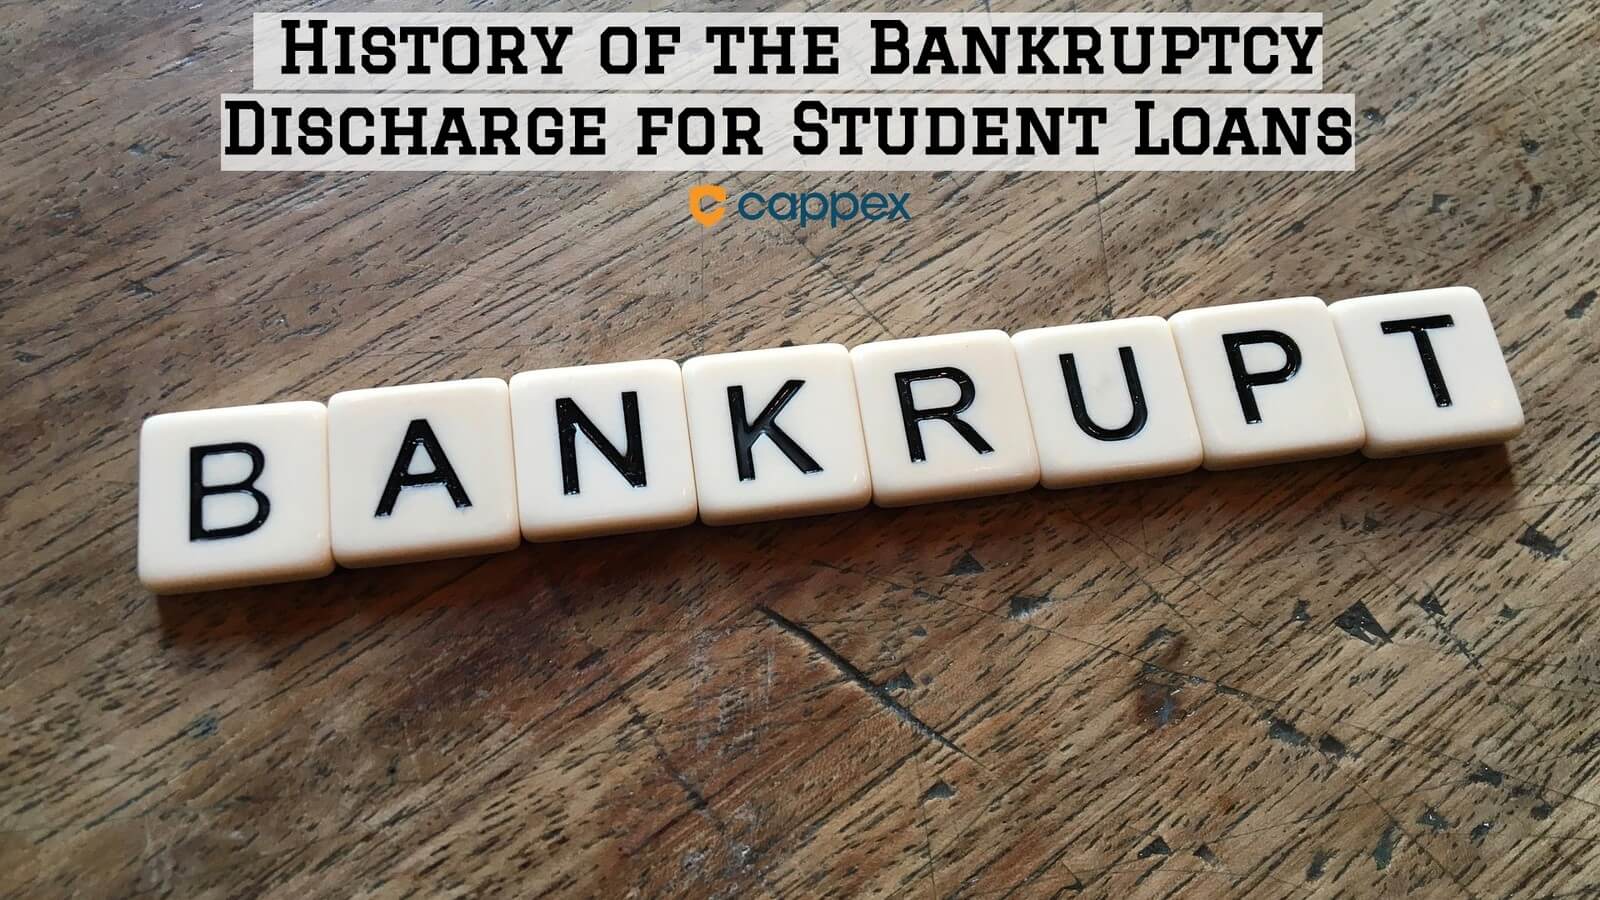 History of the Bankruptcy Discharge for Student Loans